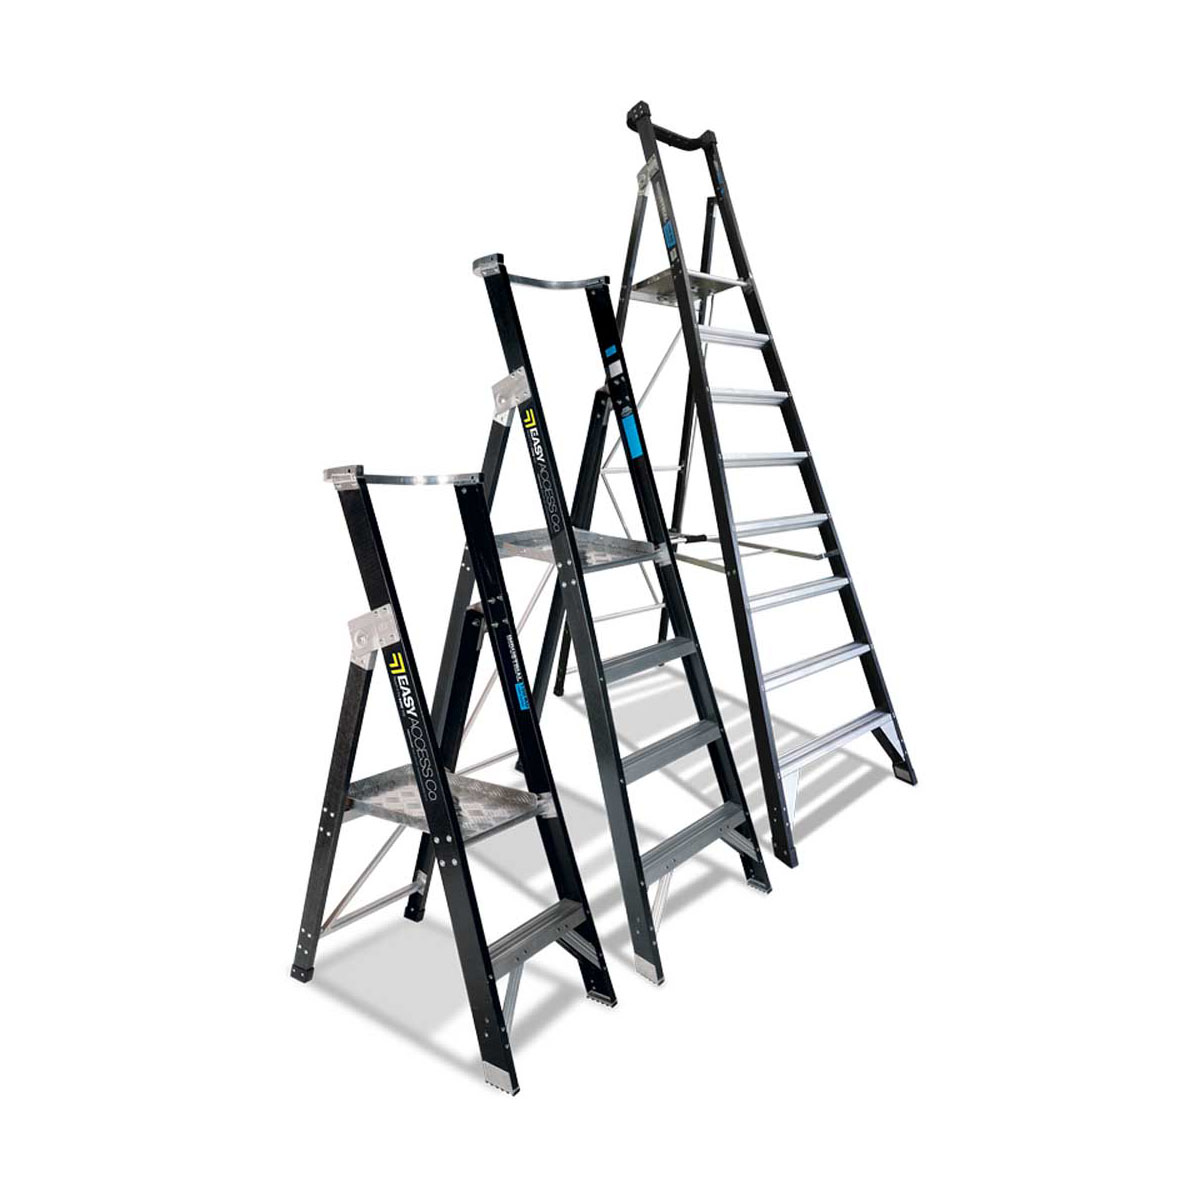 Buy Platform Ladders - Fibreglass in Platform Ladders from Easy Access available at Astrolift NZ